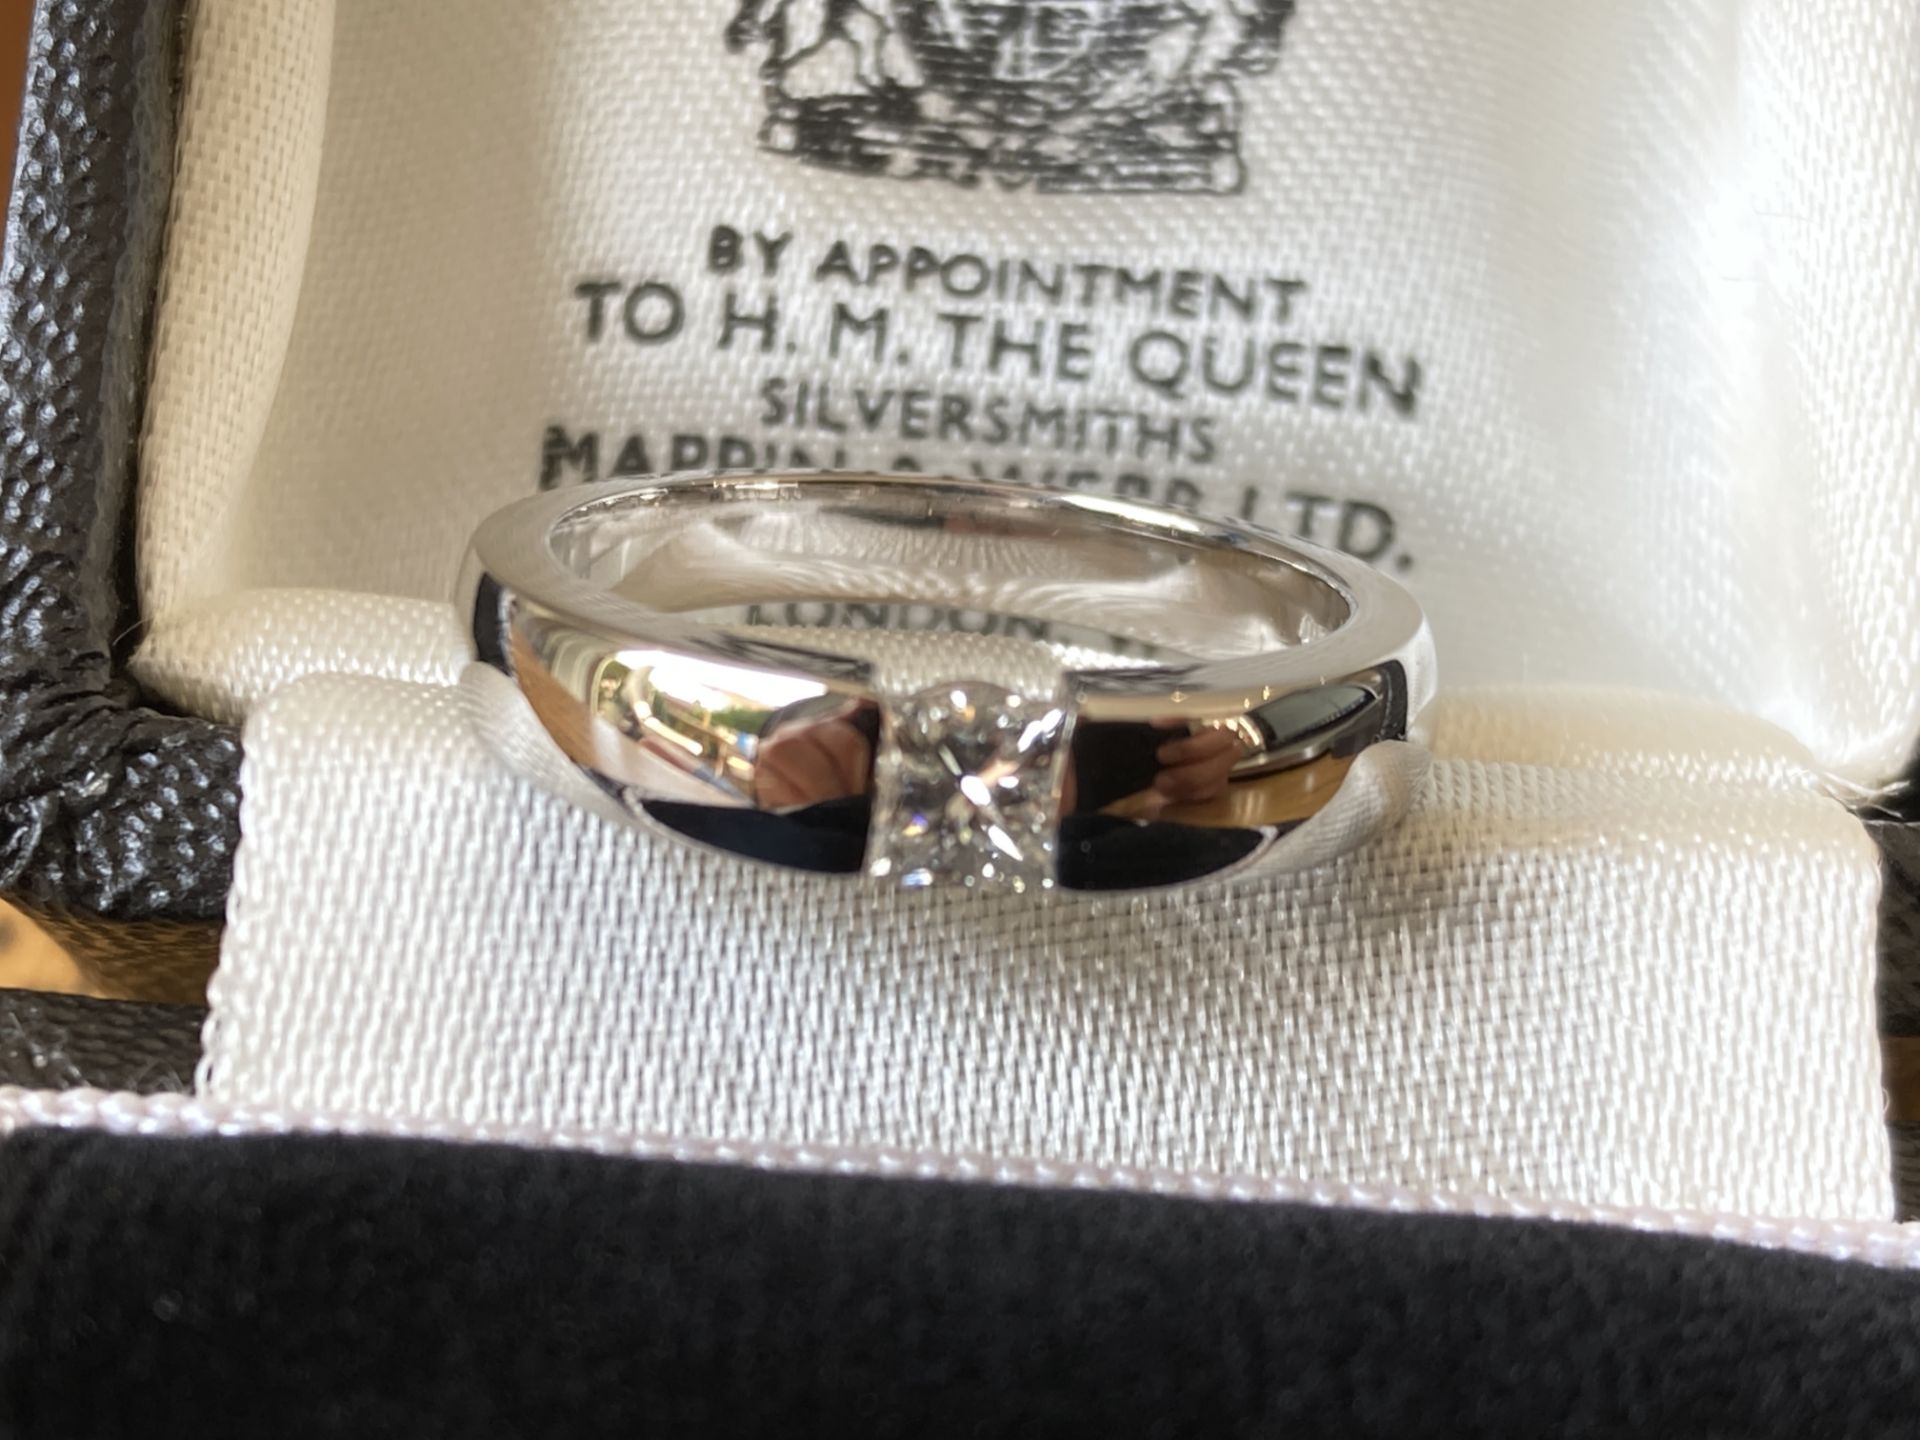 0.28CT PRINCESS CUT DIAMOND RING, 18CT WHITE GOLD (TESTED & HALLMARKED), SIZE M, 6.5G WEIGHT - Image 2 of 7